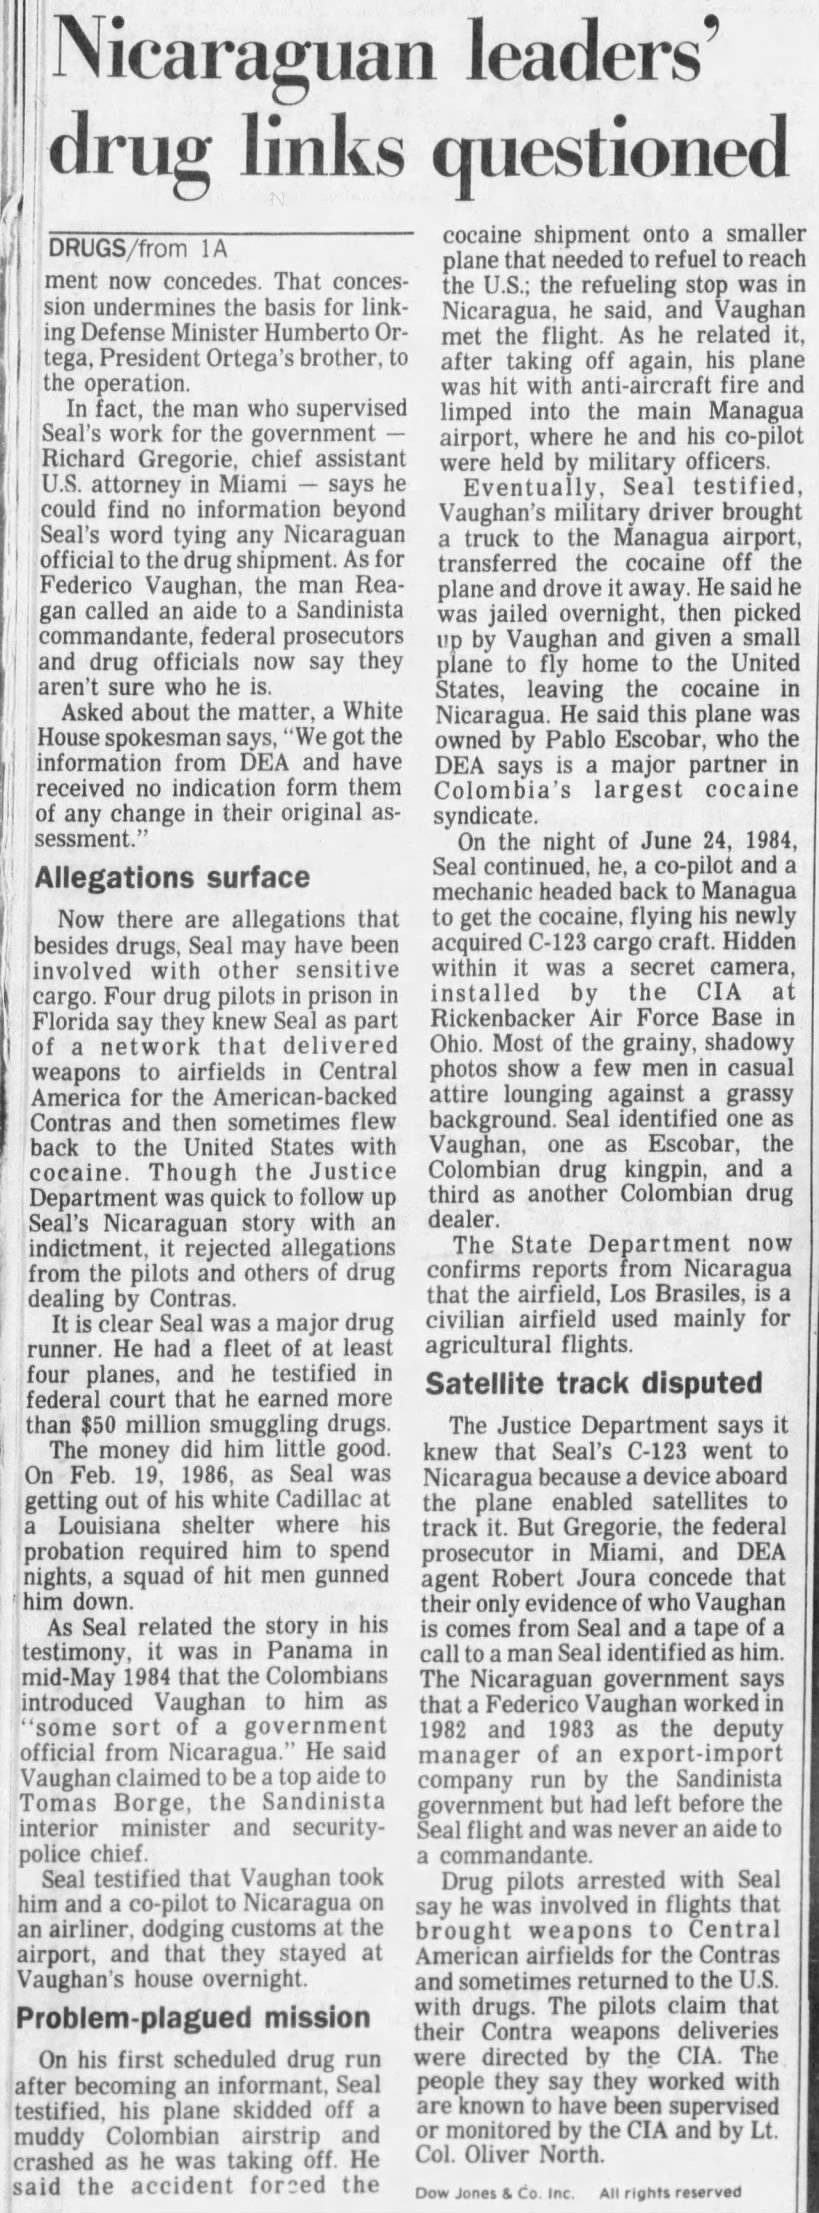 Sandinista drugs questioned, p.5